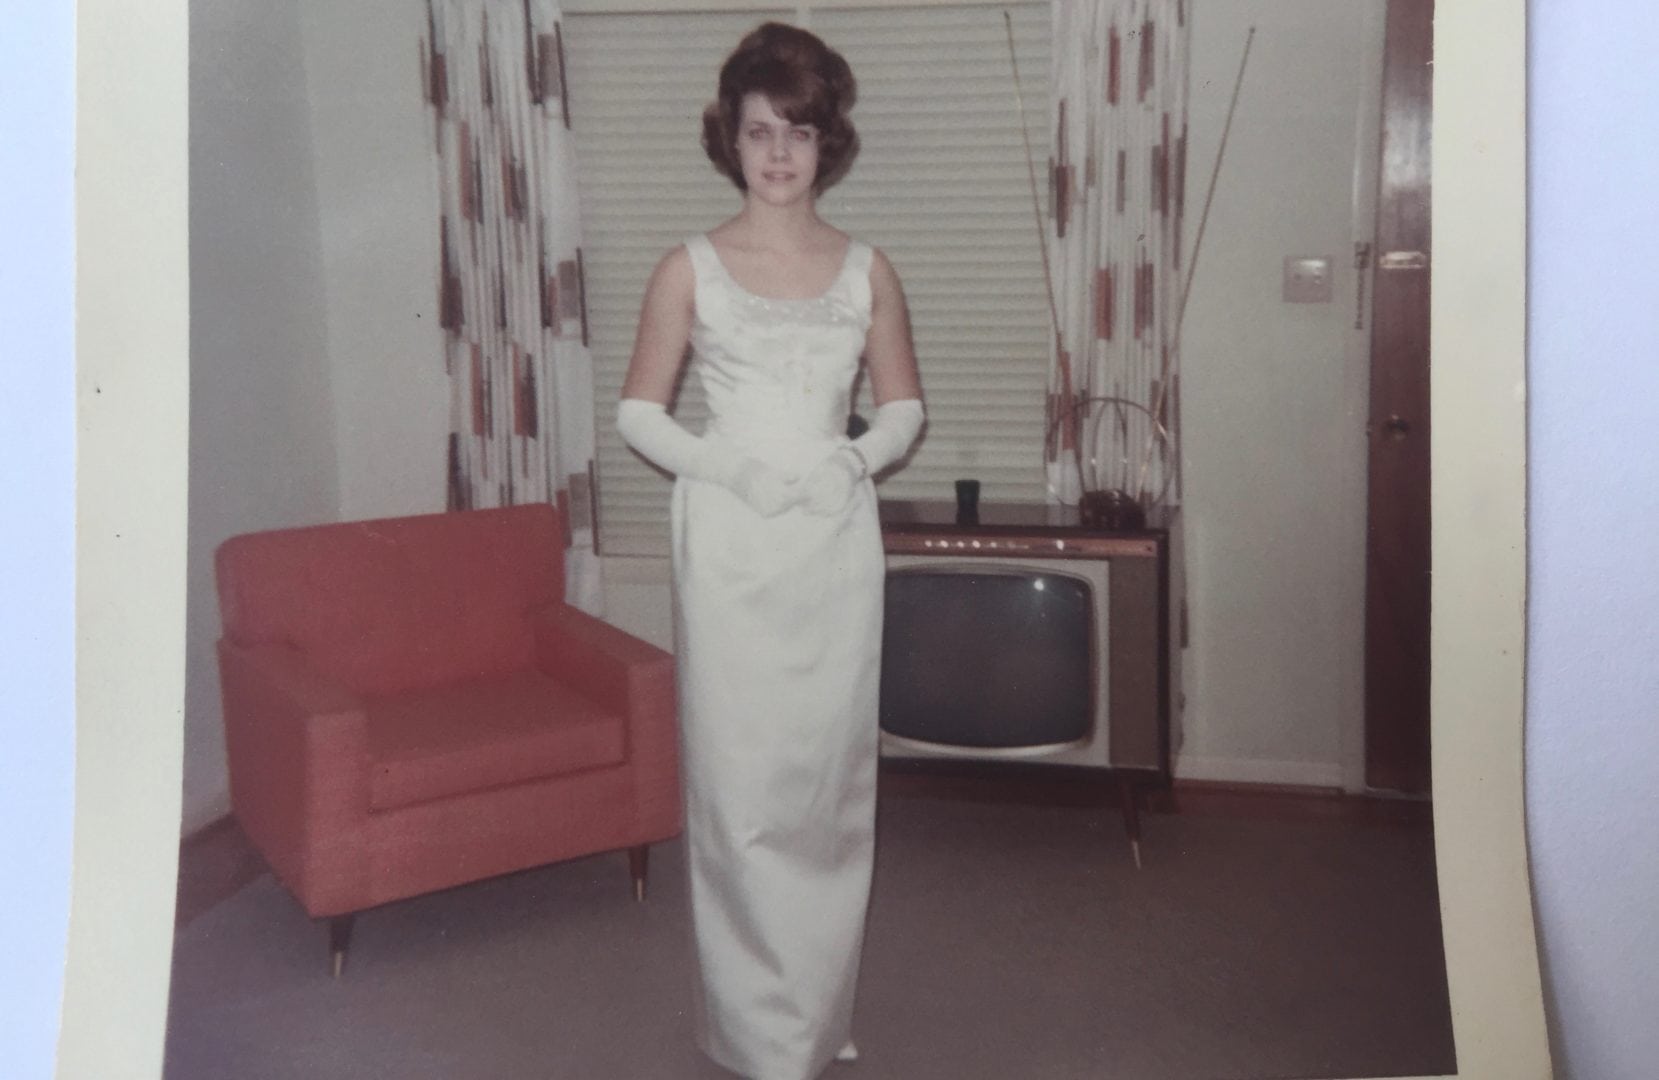 Me in my High School prom dress. The dress was fine... but the hair!